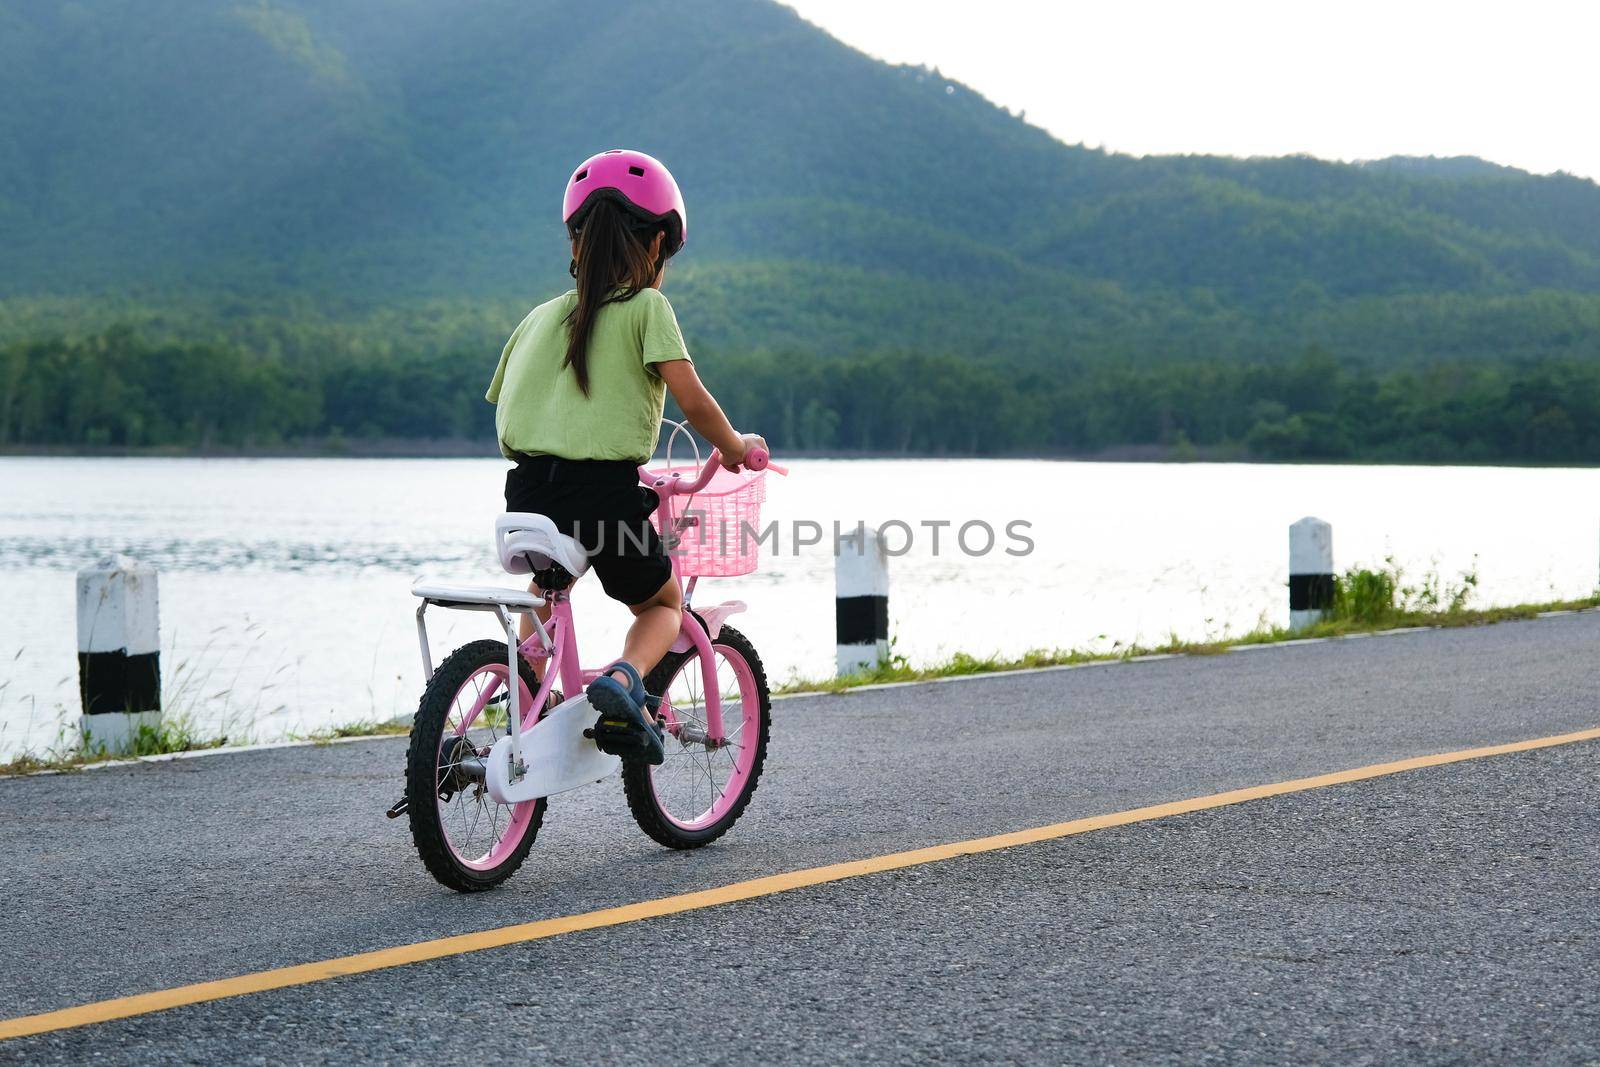 Cute little girl in a helmet riding a bicycle on an asphalt road in summer. Happy little girl riding a bicycle outdoors. Healthy Summer Activities for Kids